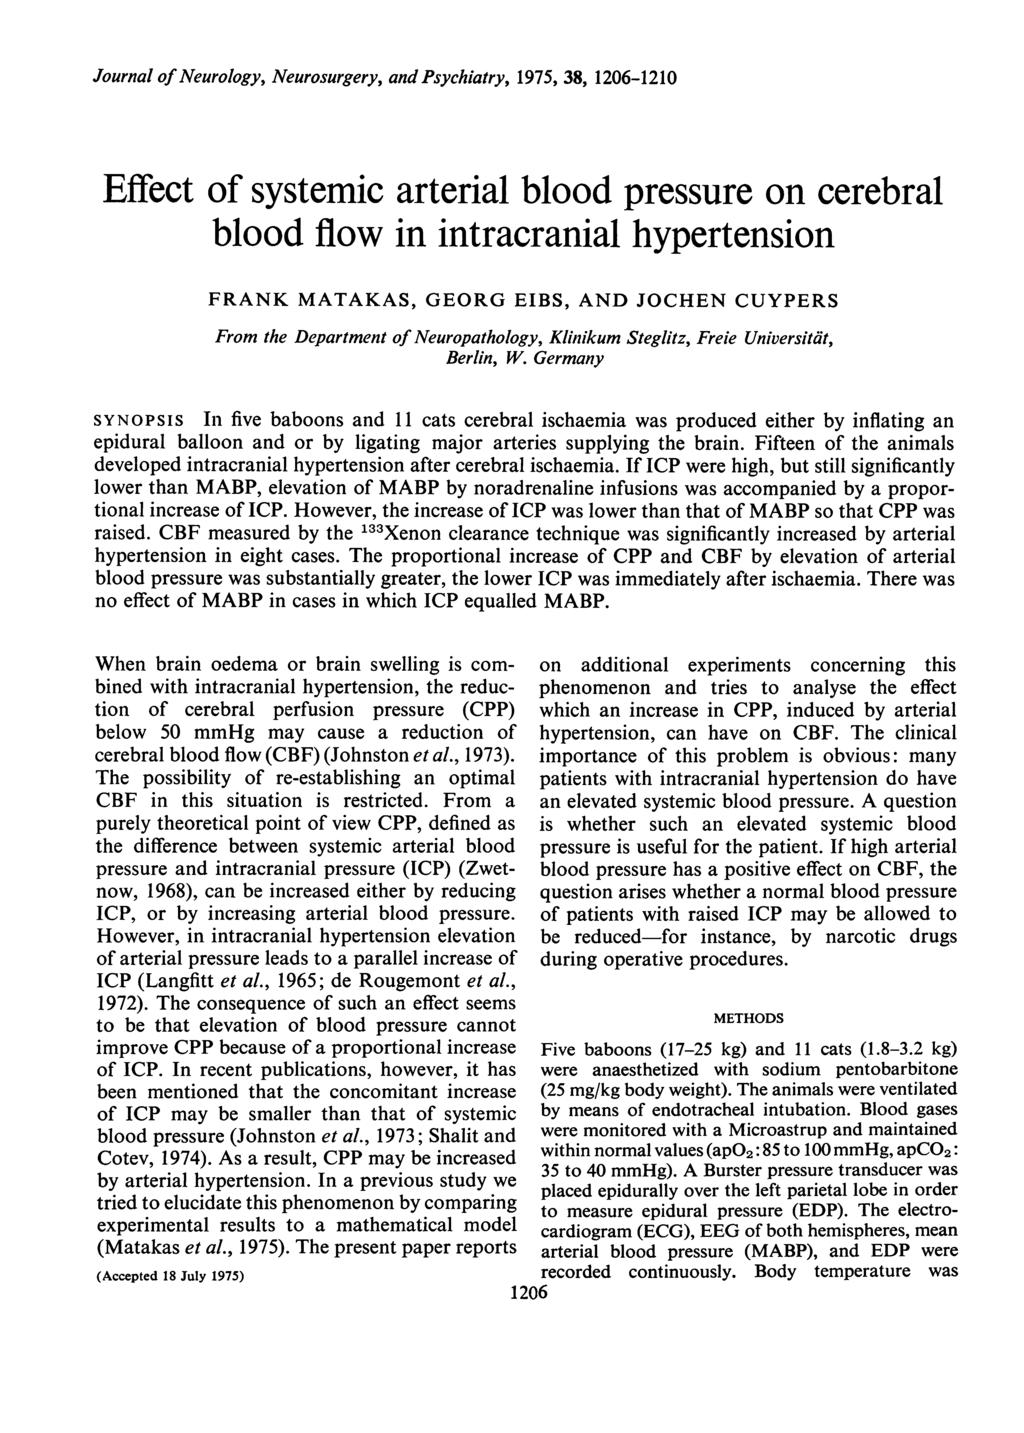 Journal of Neurology, Neurosurgery, and Psychiatry, 1975, 38, 1206-1210 Effect of systemic arterial blood pressure on cerebral blood flow in intracranial hypertension FRANK MATAKAS, GEORG EIBS, AND